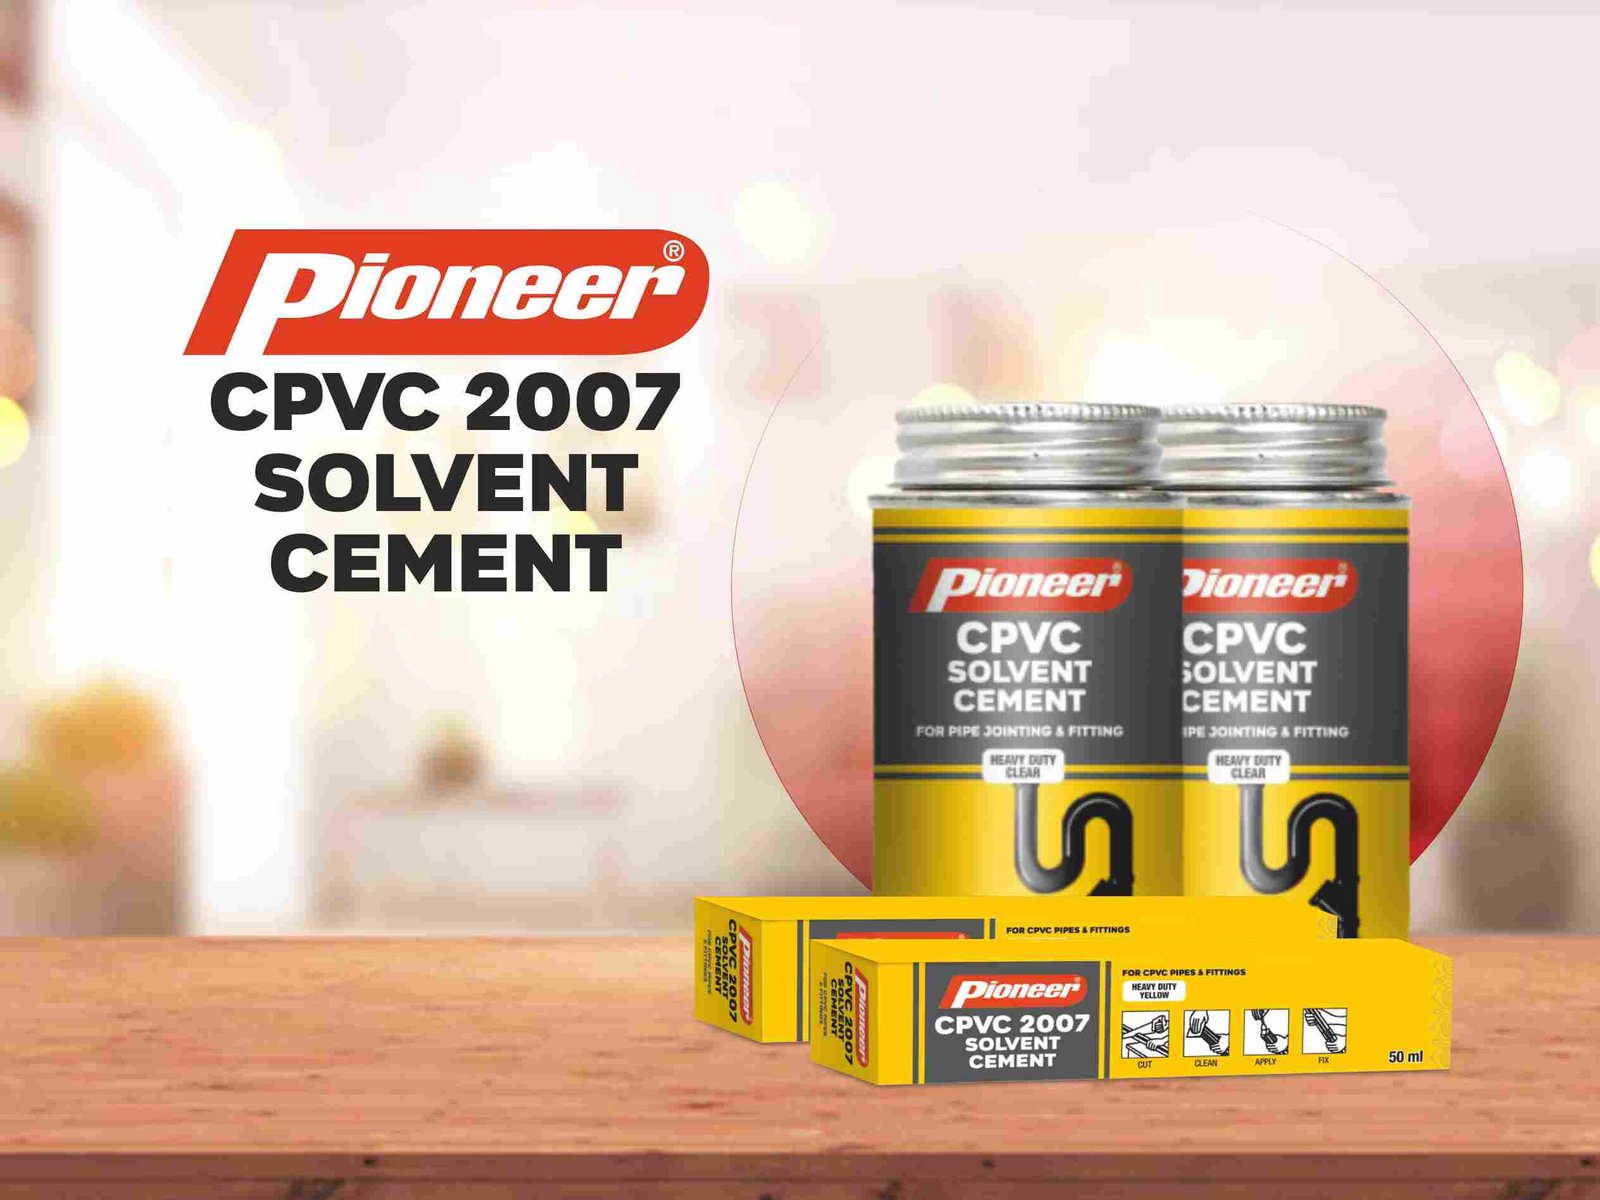 PIONEER CPVC SOLVENT CEMENT, PIONEER-CPVC-SOLVENT-CEMENT